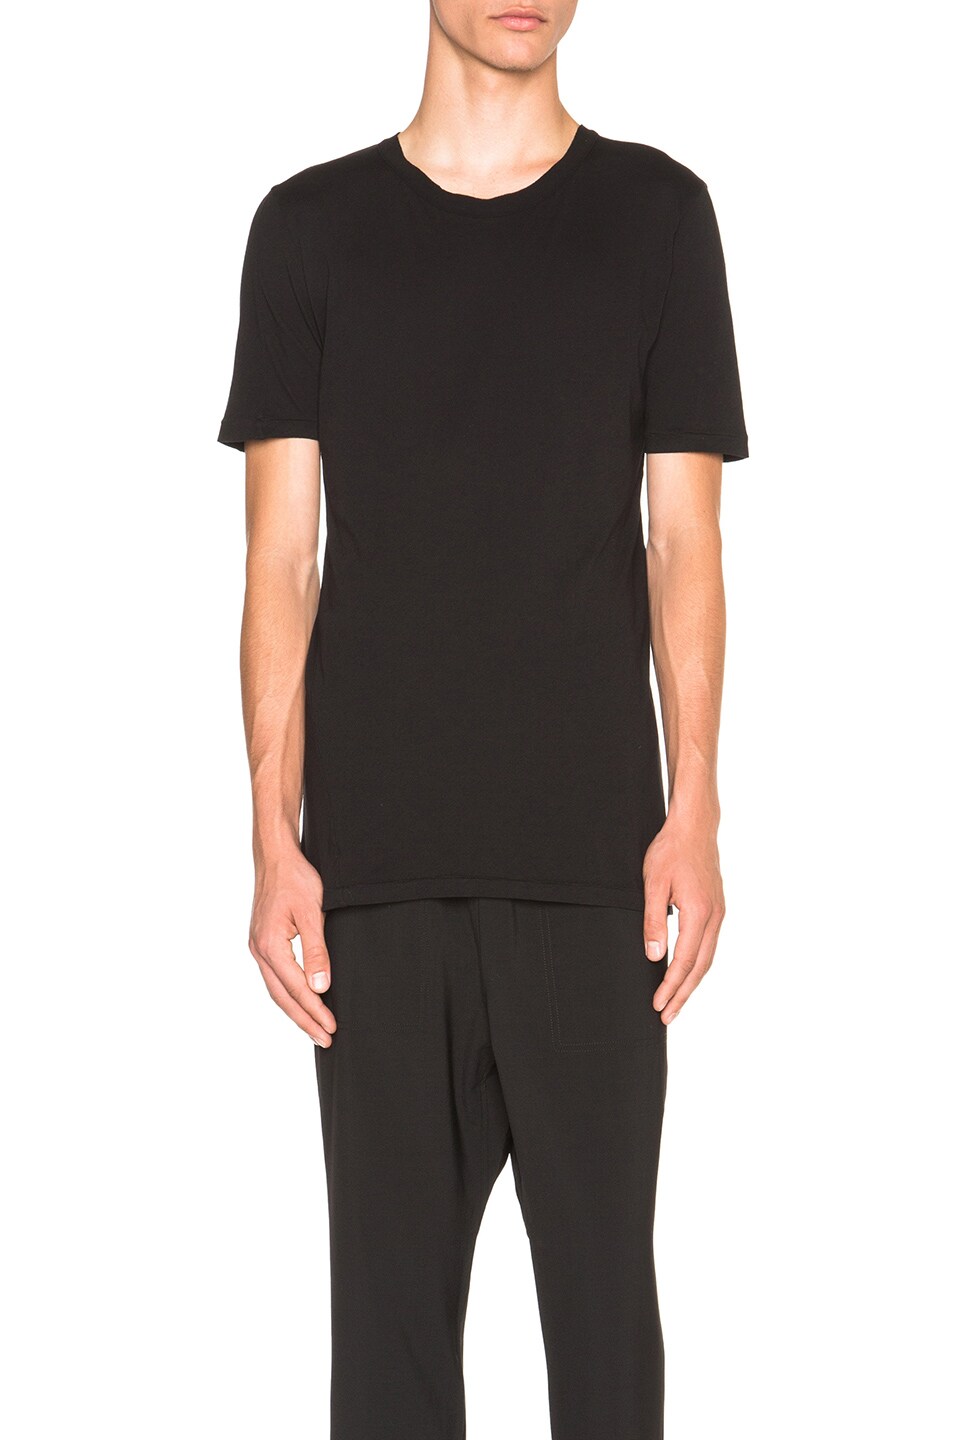 Image 1 of SILENT DAMIR DOMA Themios Short Sleeve Tee in Silent